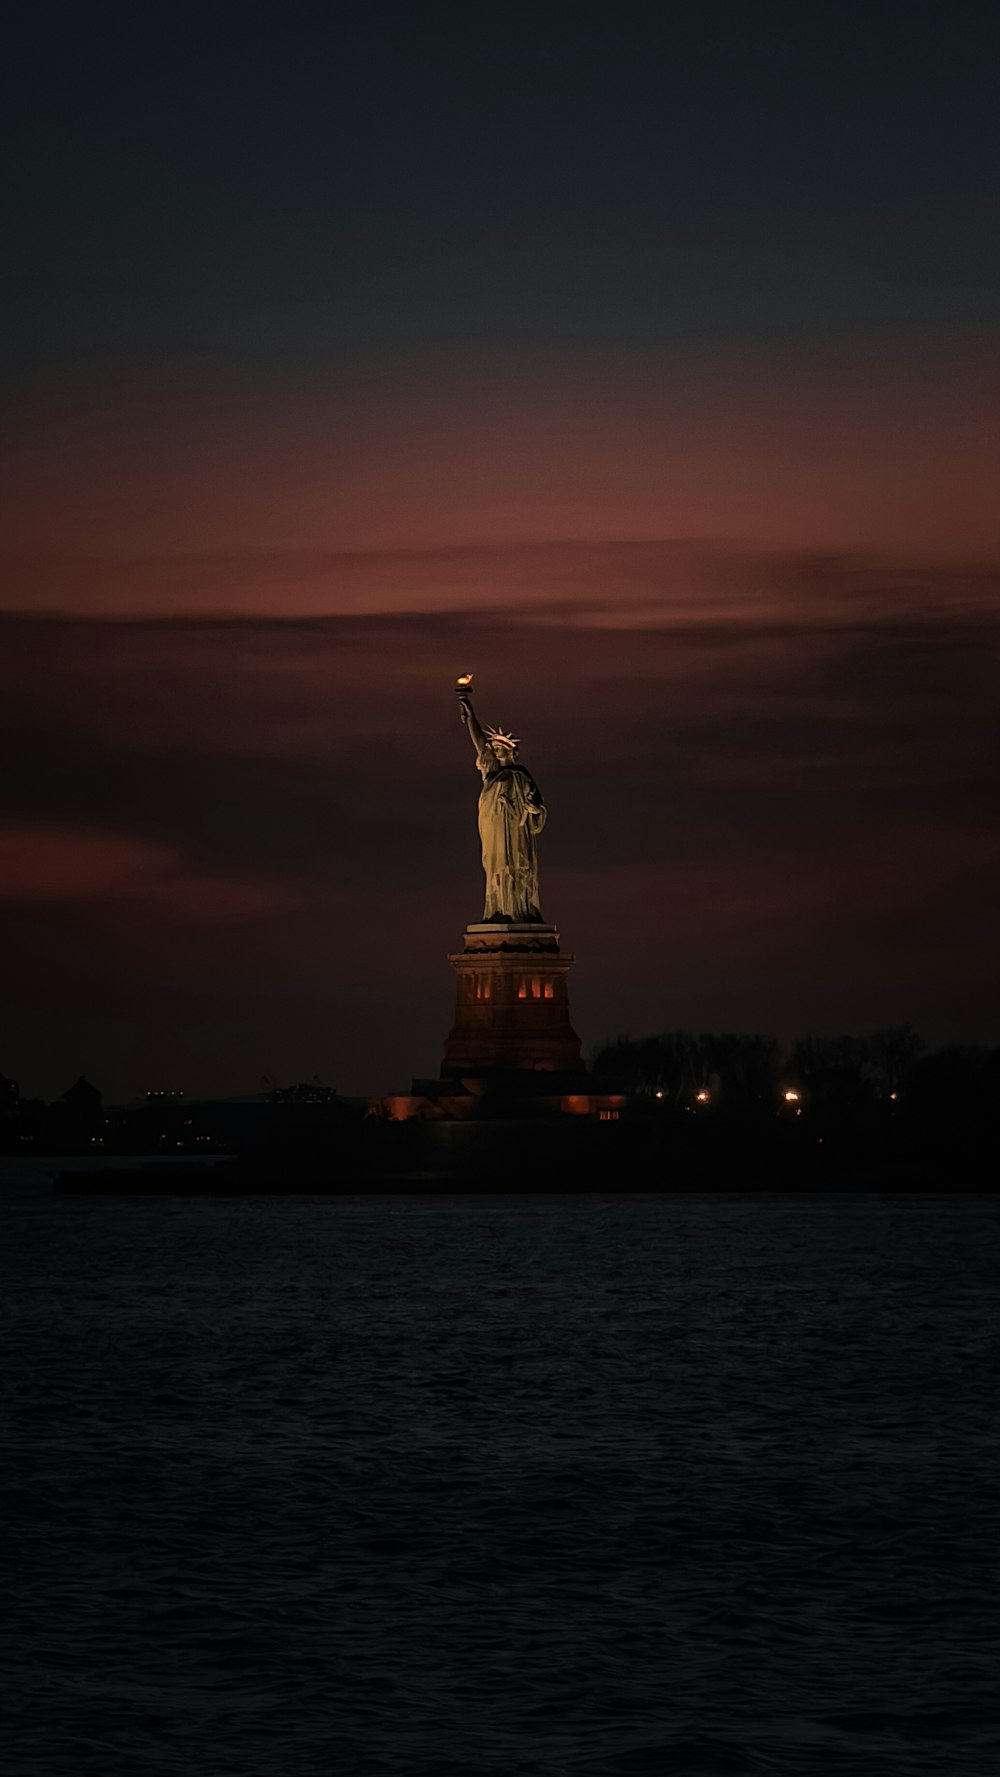 the statue of liberty is lit up at night